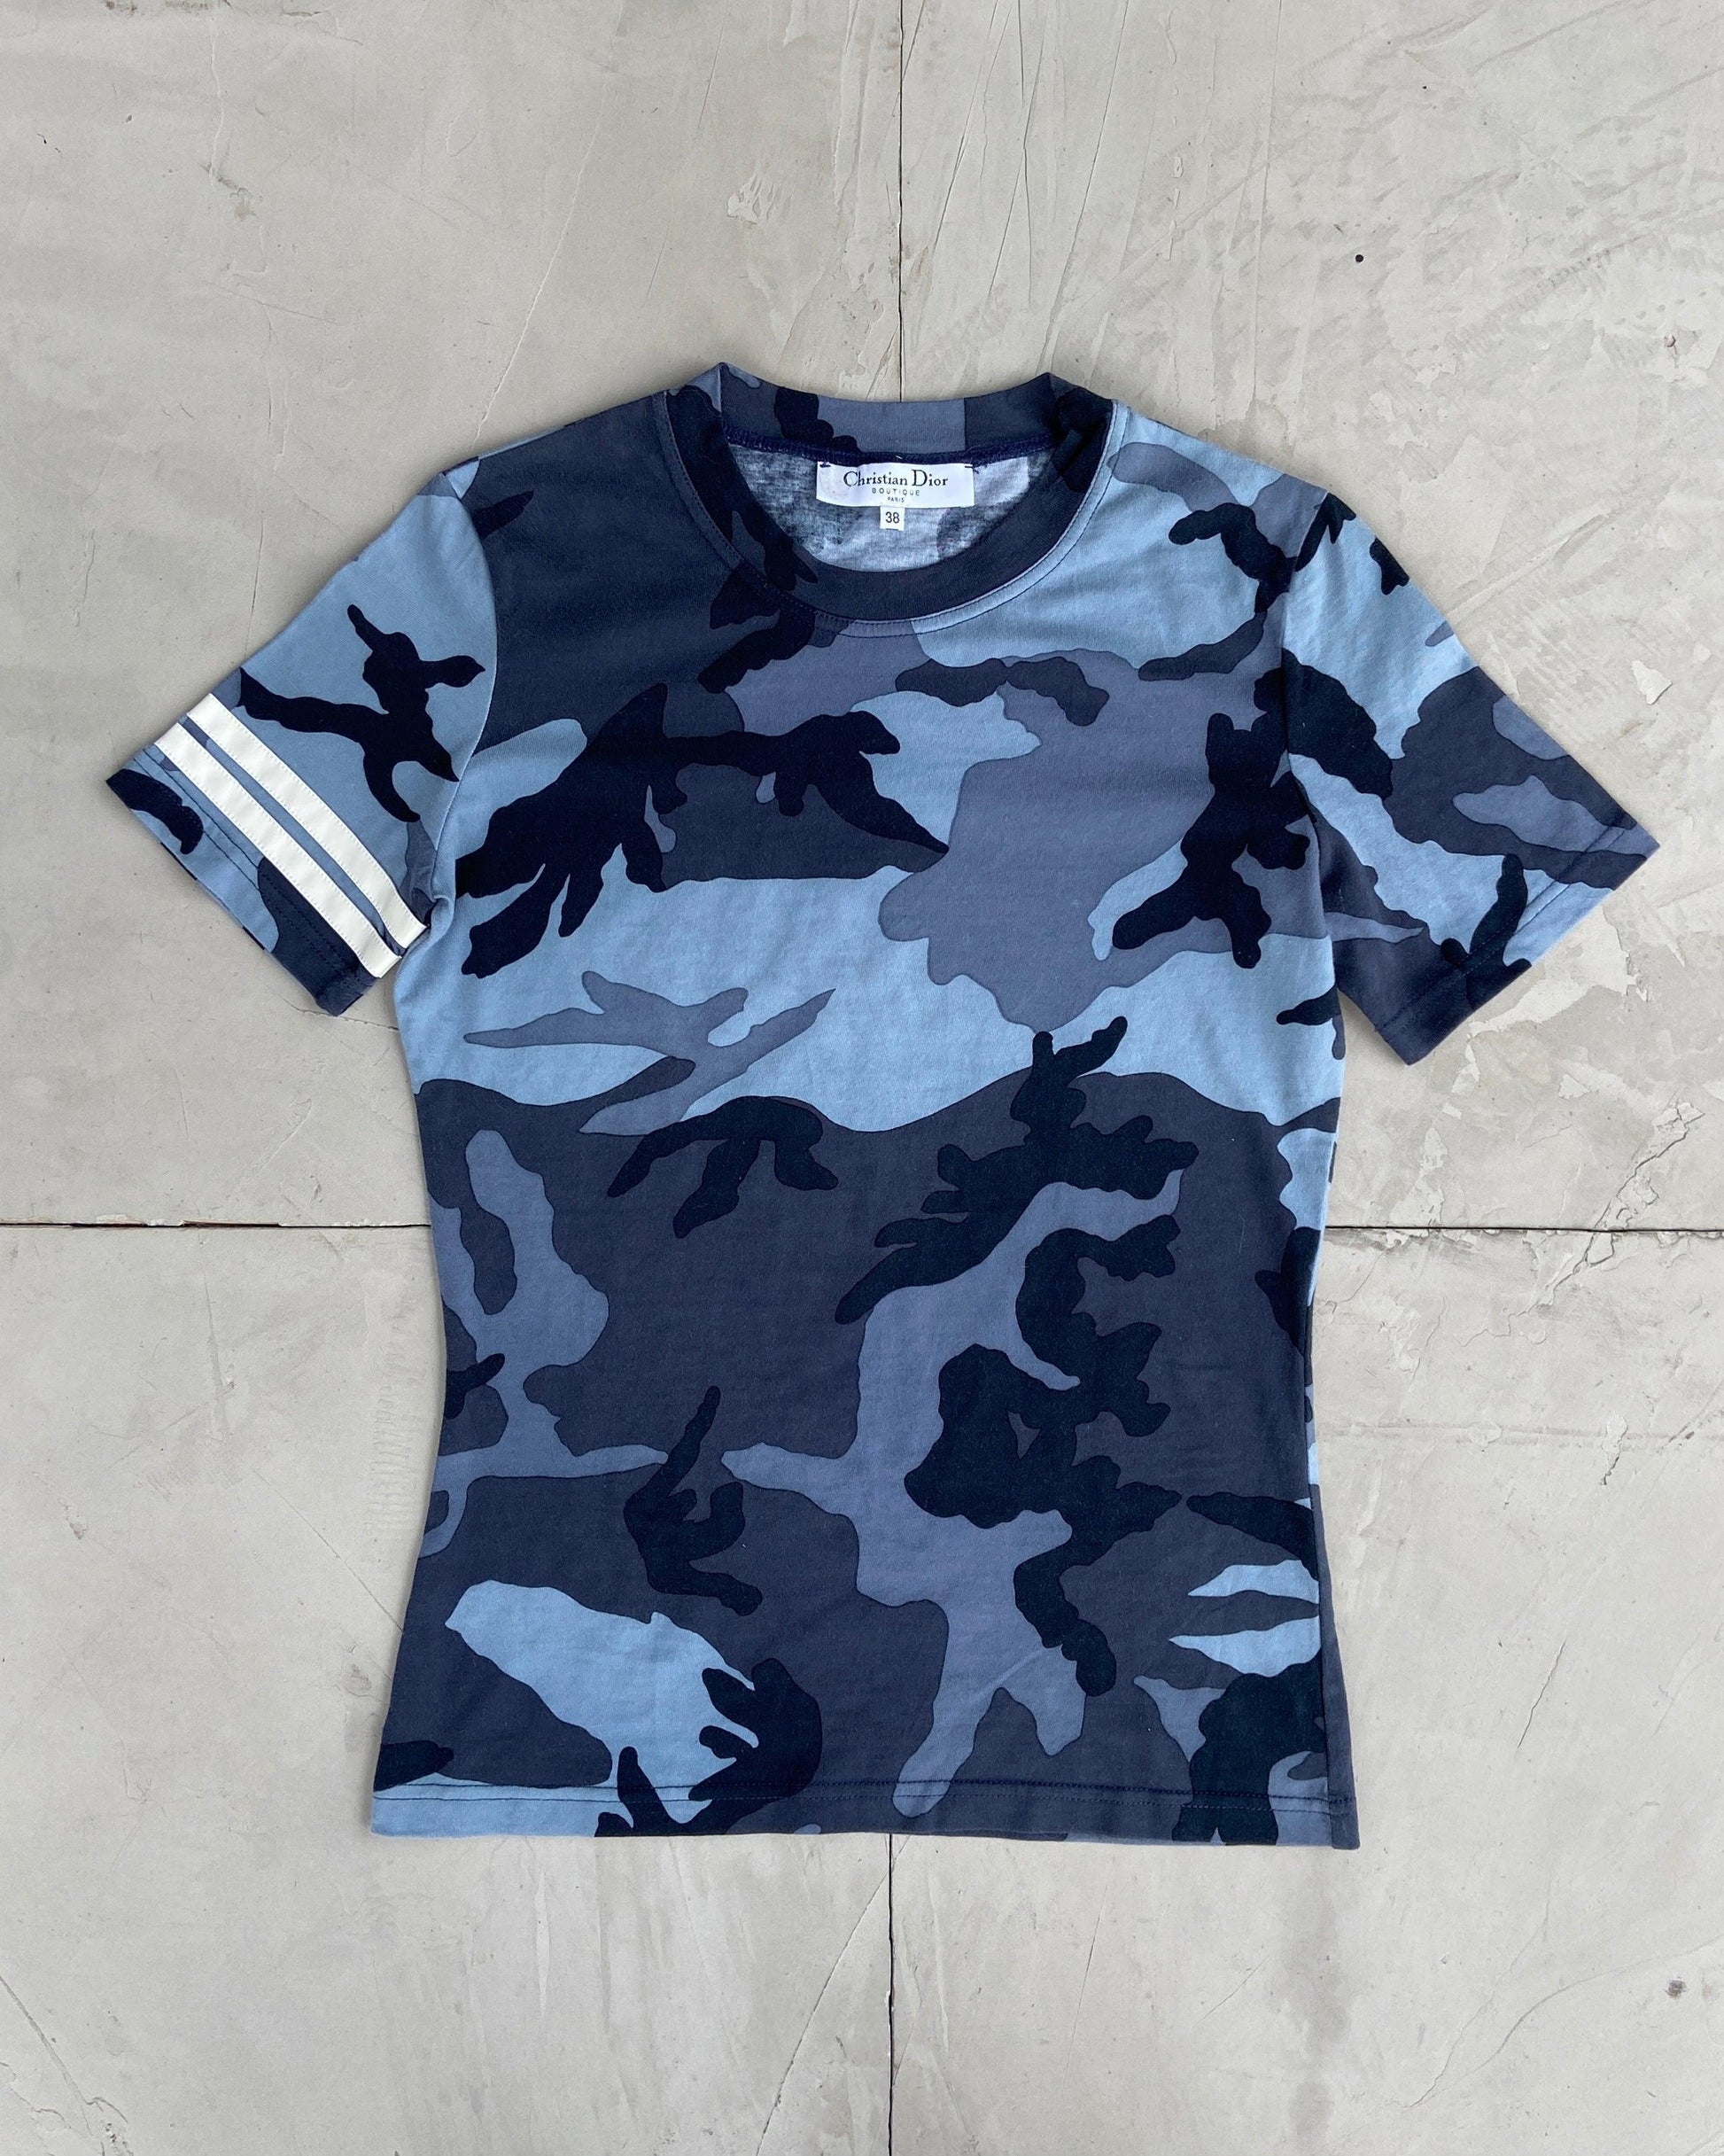 CHRISTIAN DIOR 2000'S BLUE CAMO TOP - S/M - Known Source